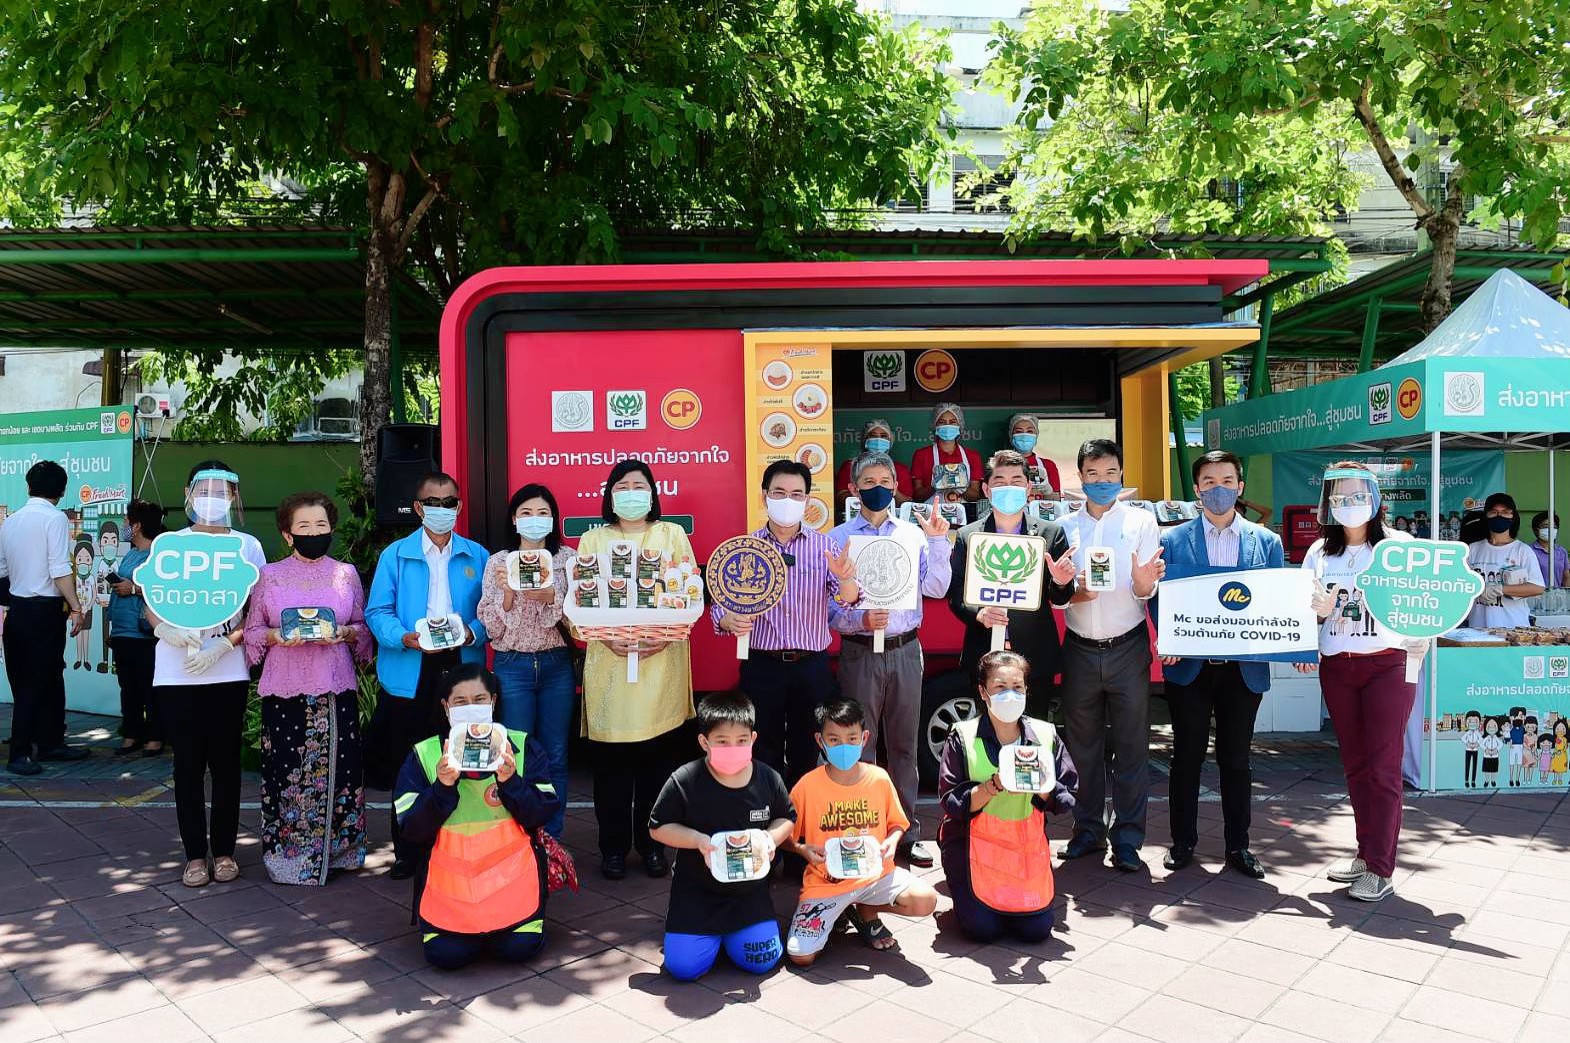 Deputy PM joins CPF food truck project to hand out free meals